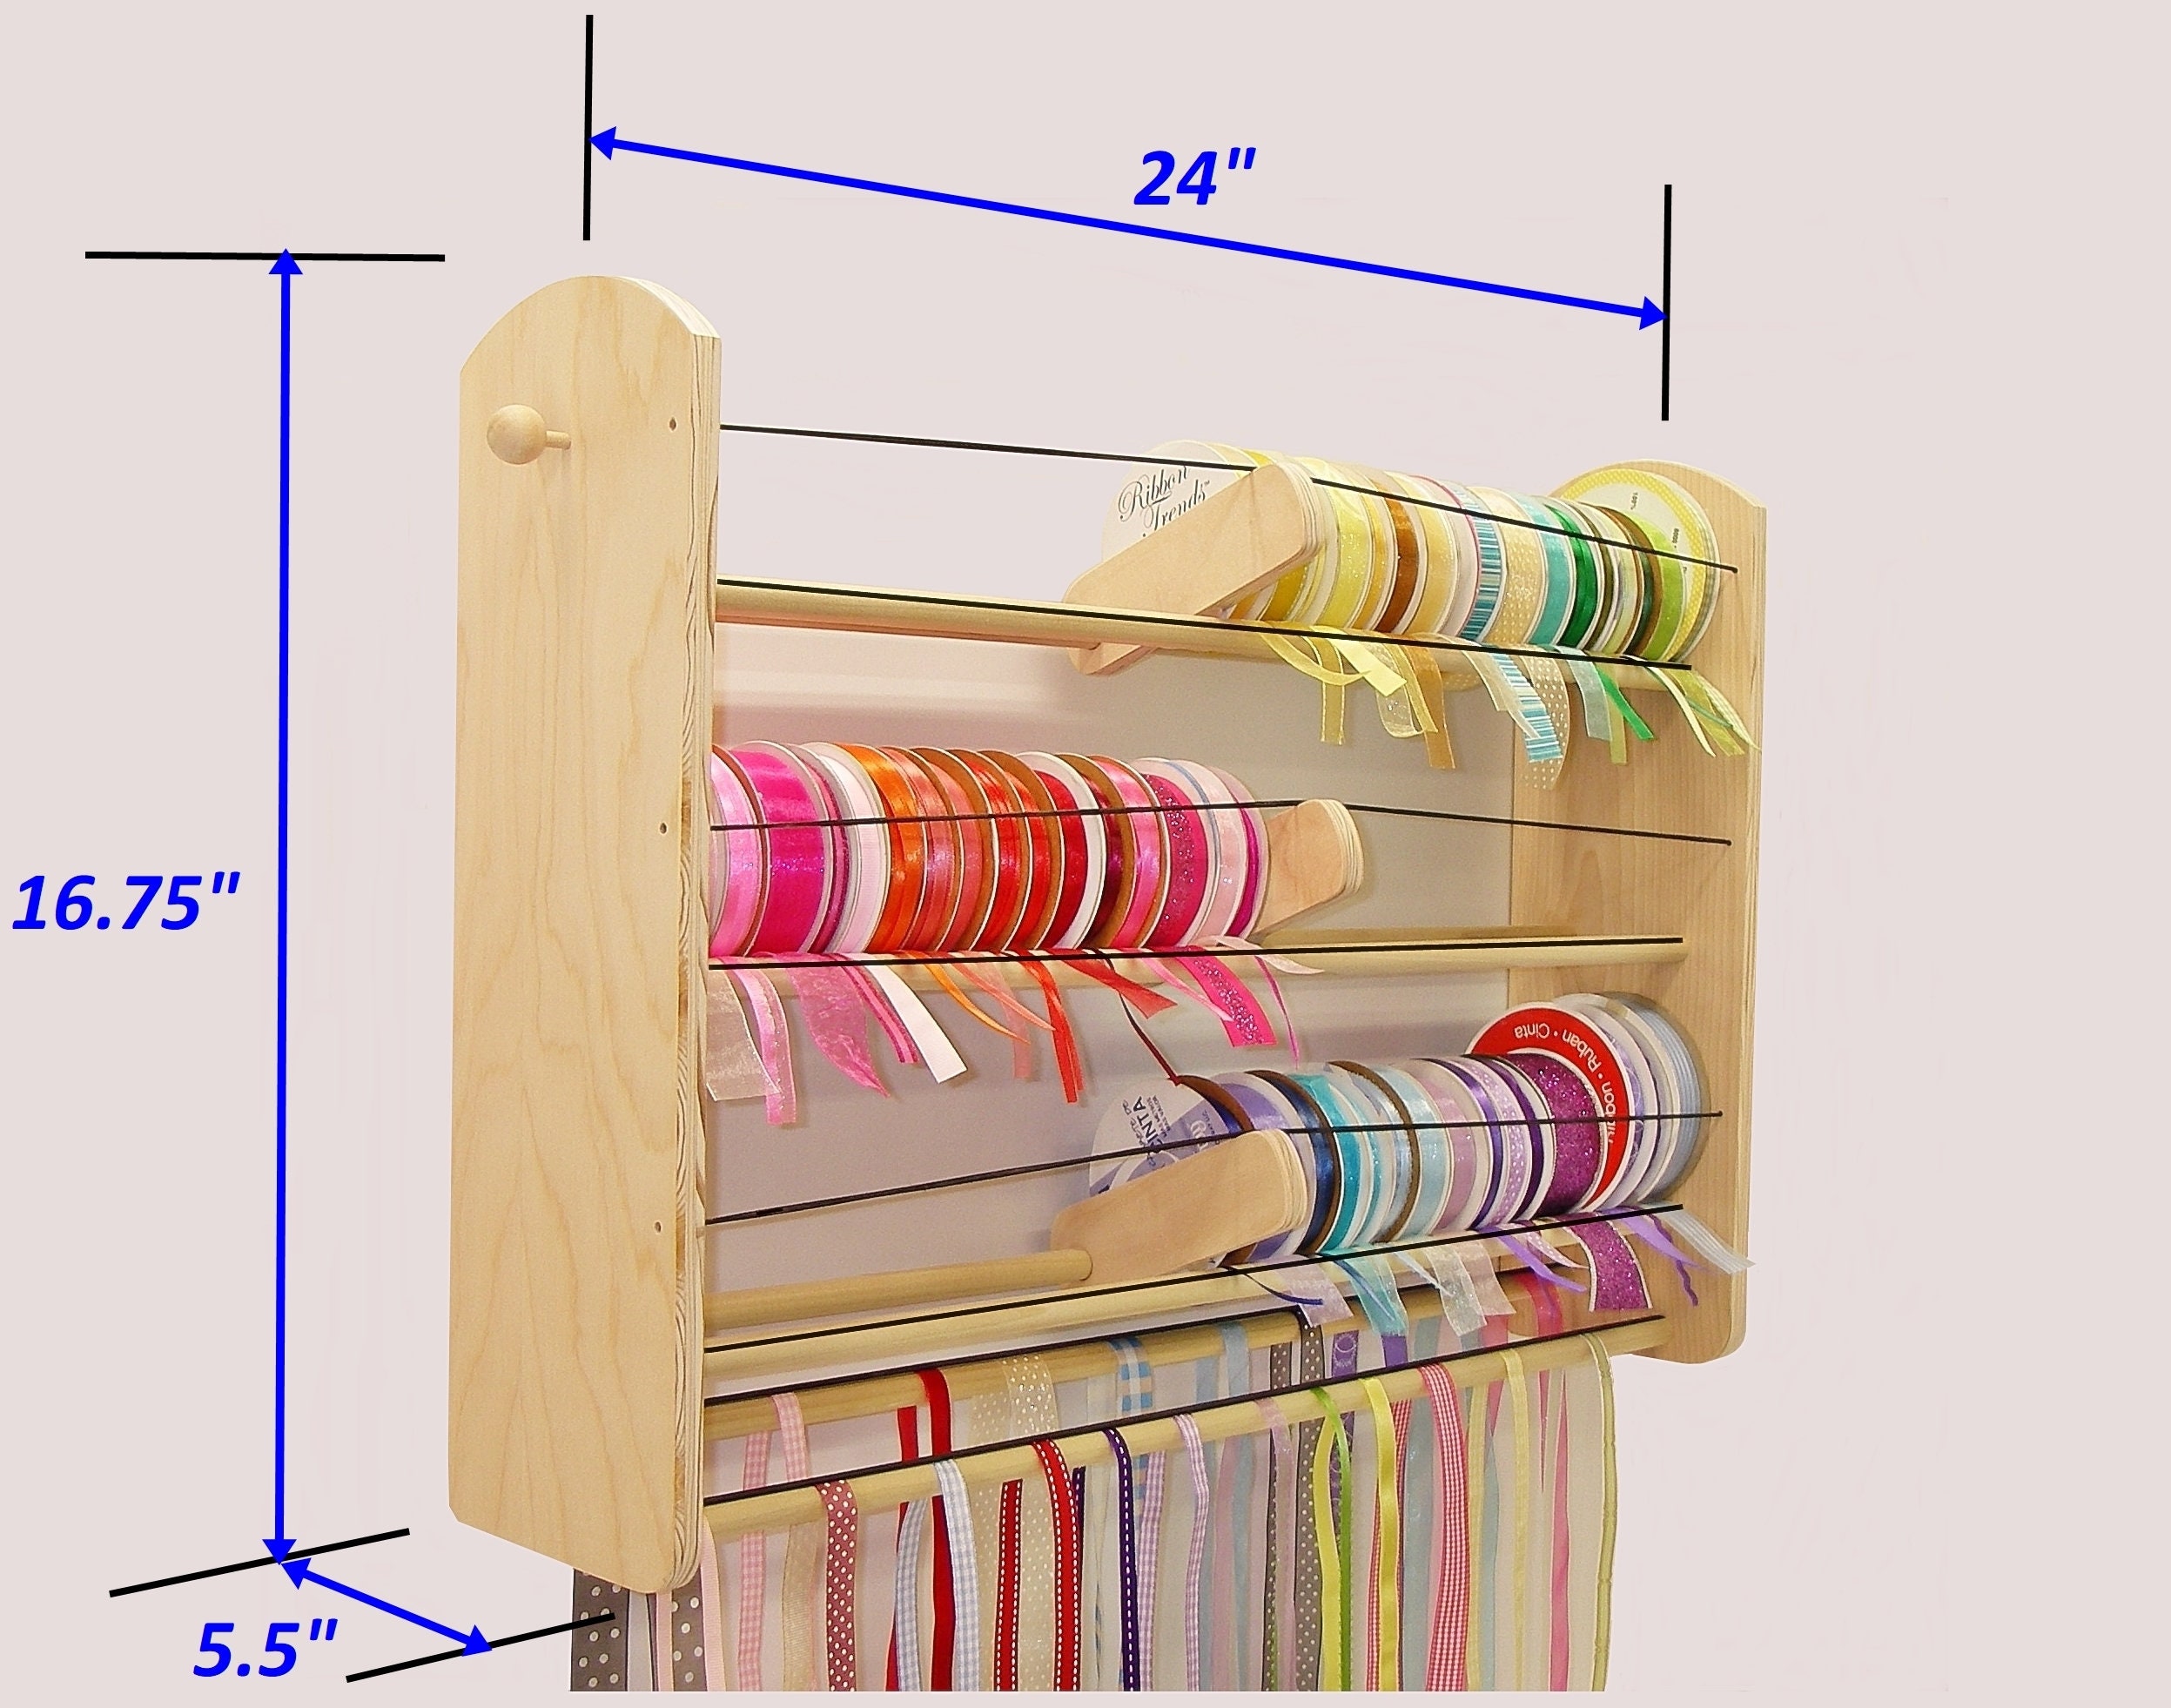 30in. X 40in. Thread Spool Holder for Large Spools shop Will Close for 2  Months Feb.1st 